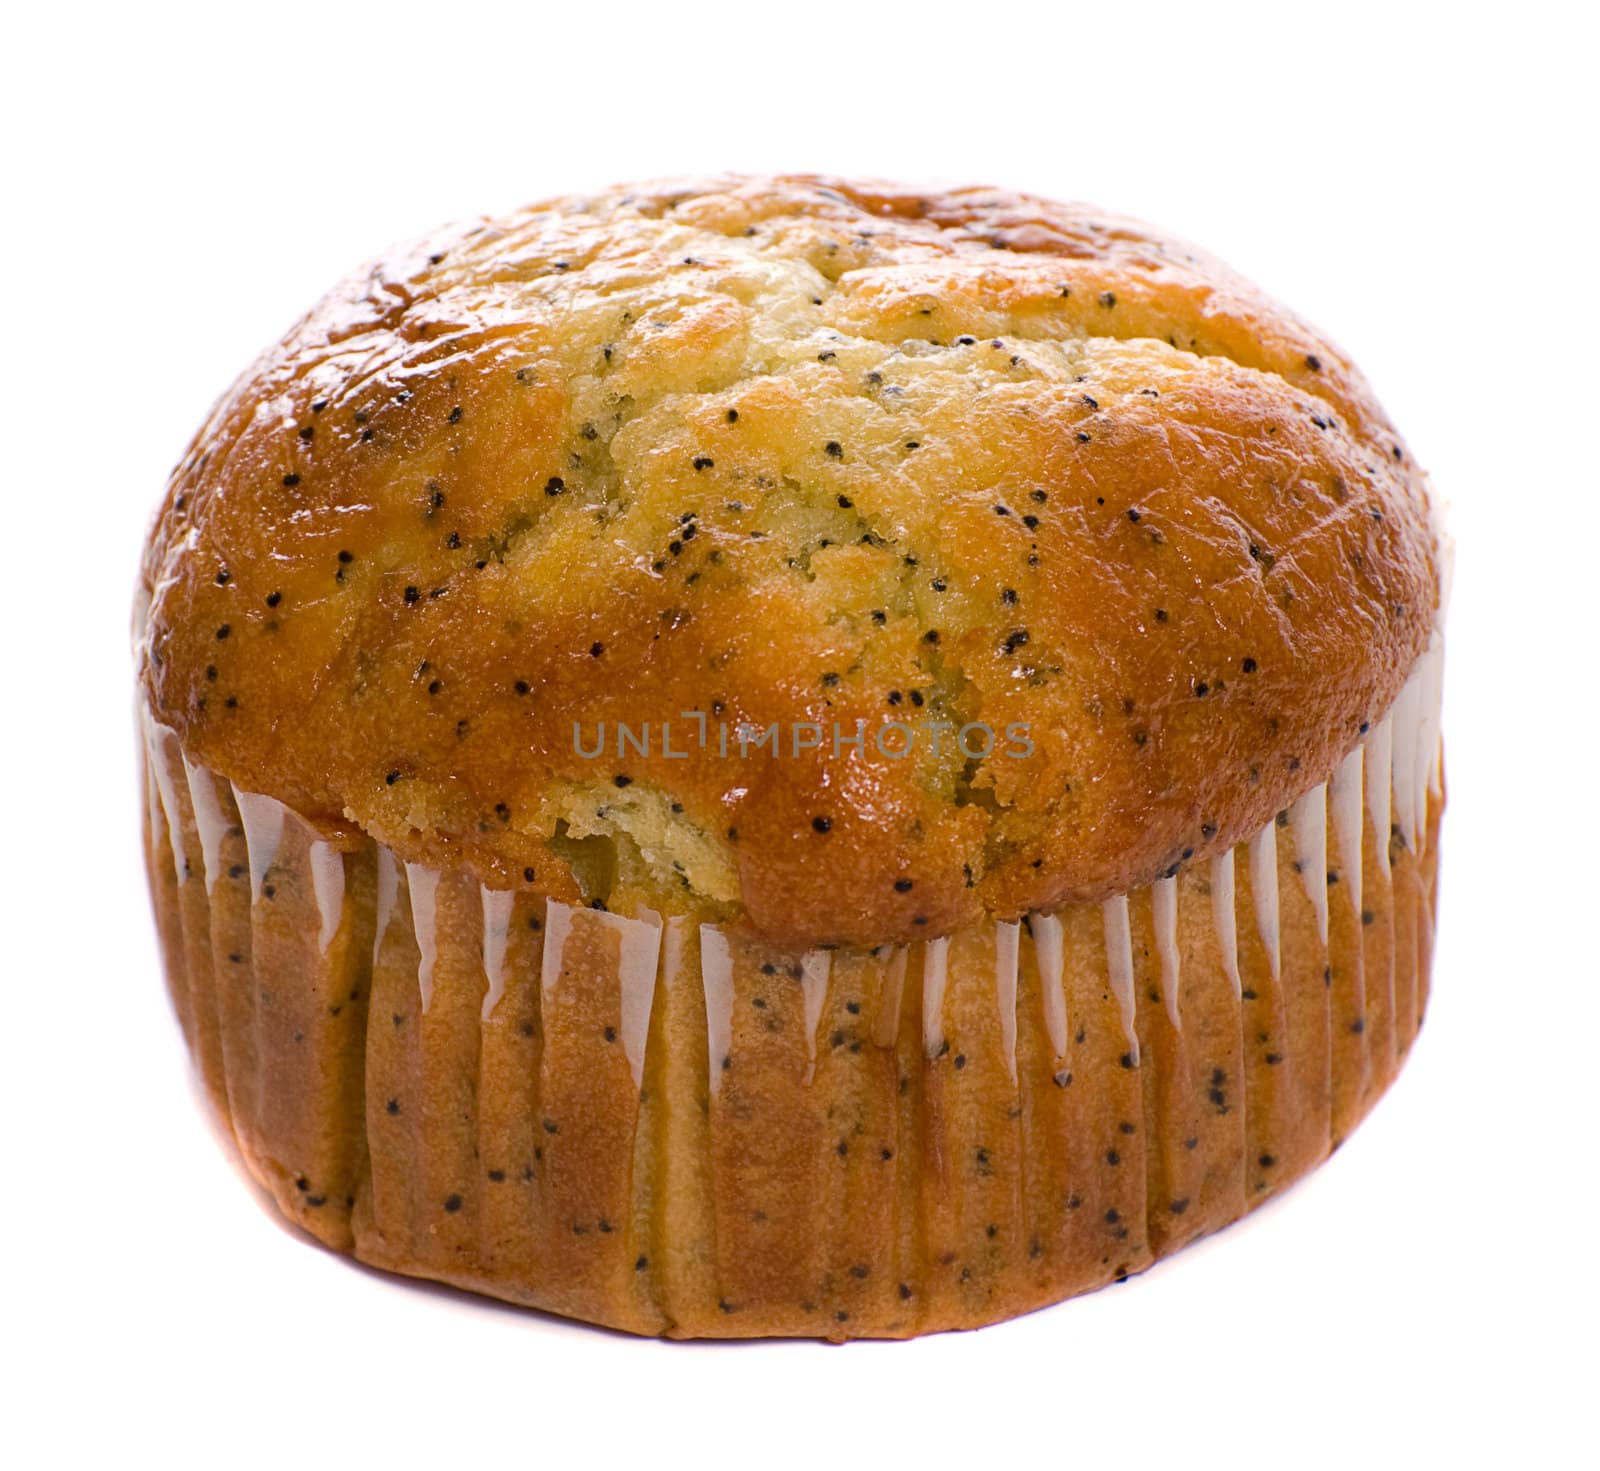 A carrot muffin with the wrapping on is isolated against a white background